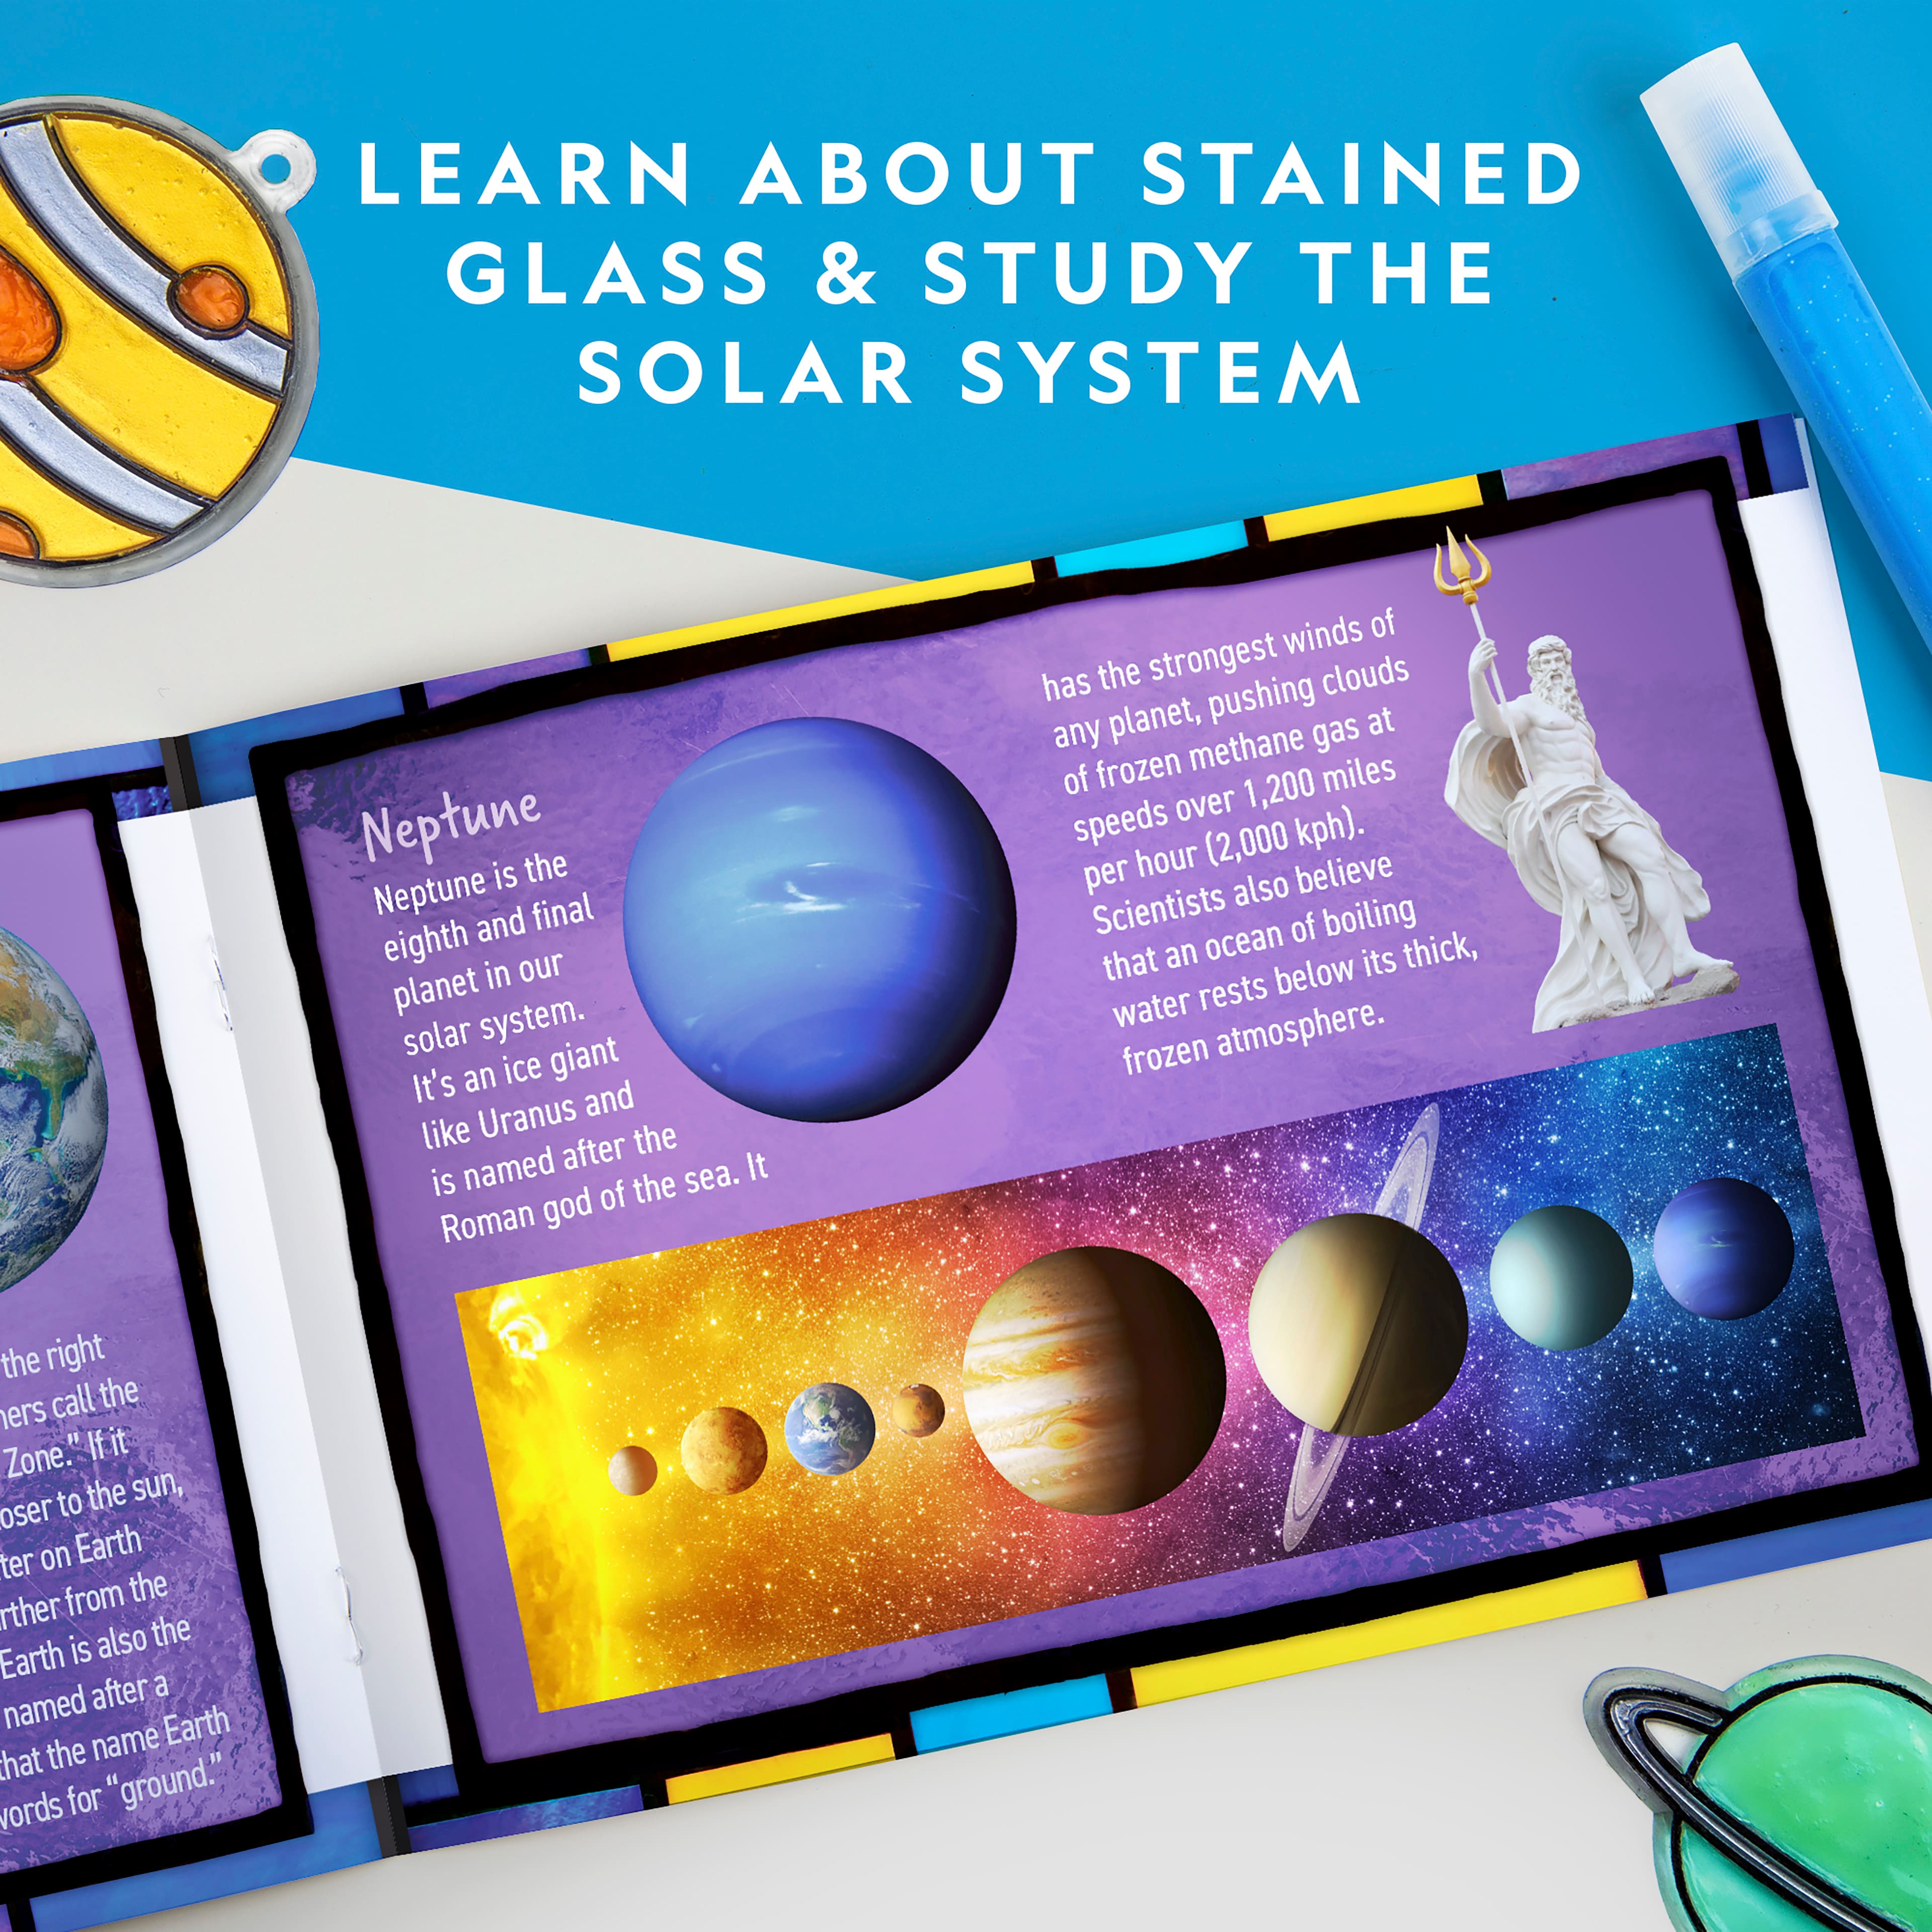 6 Pack: National Geographic&#x2122; The Solar System Glow-In-the-Dark Stained Glass Craft Kit